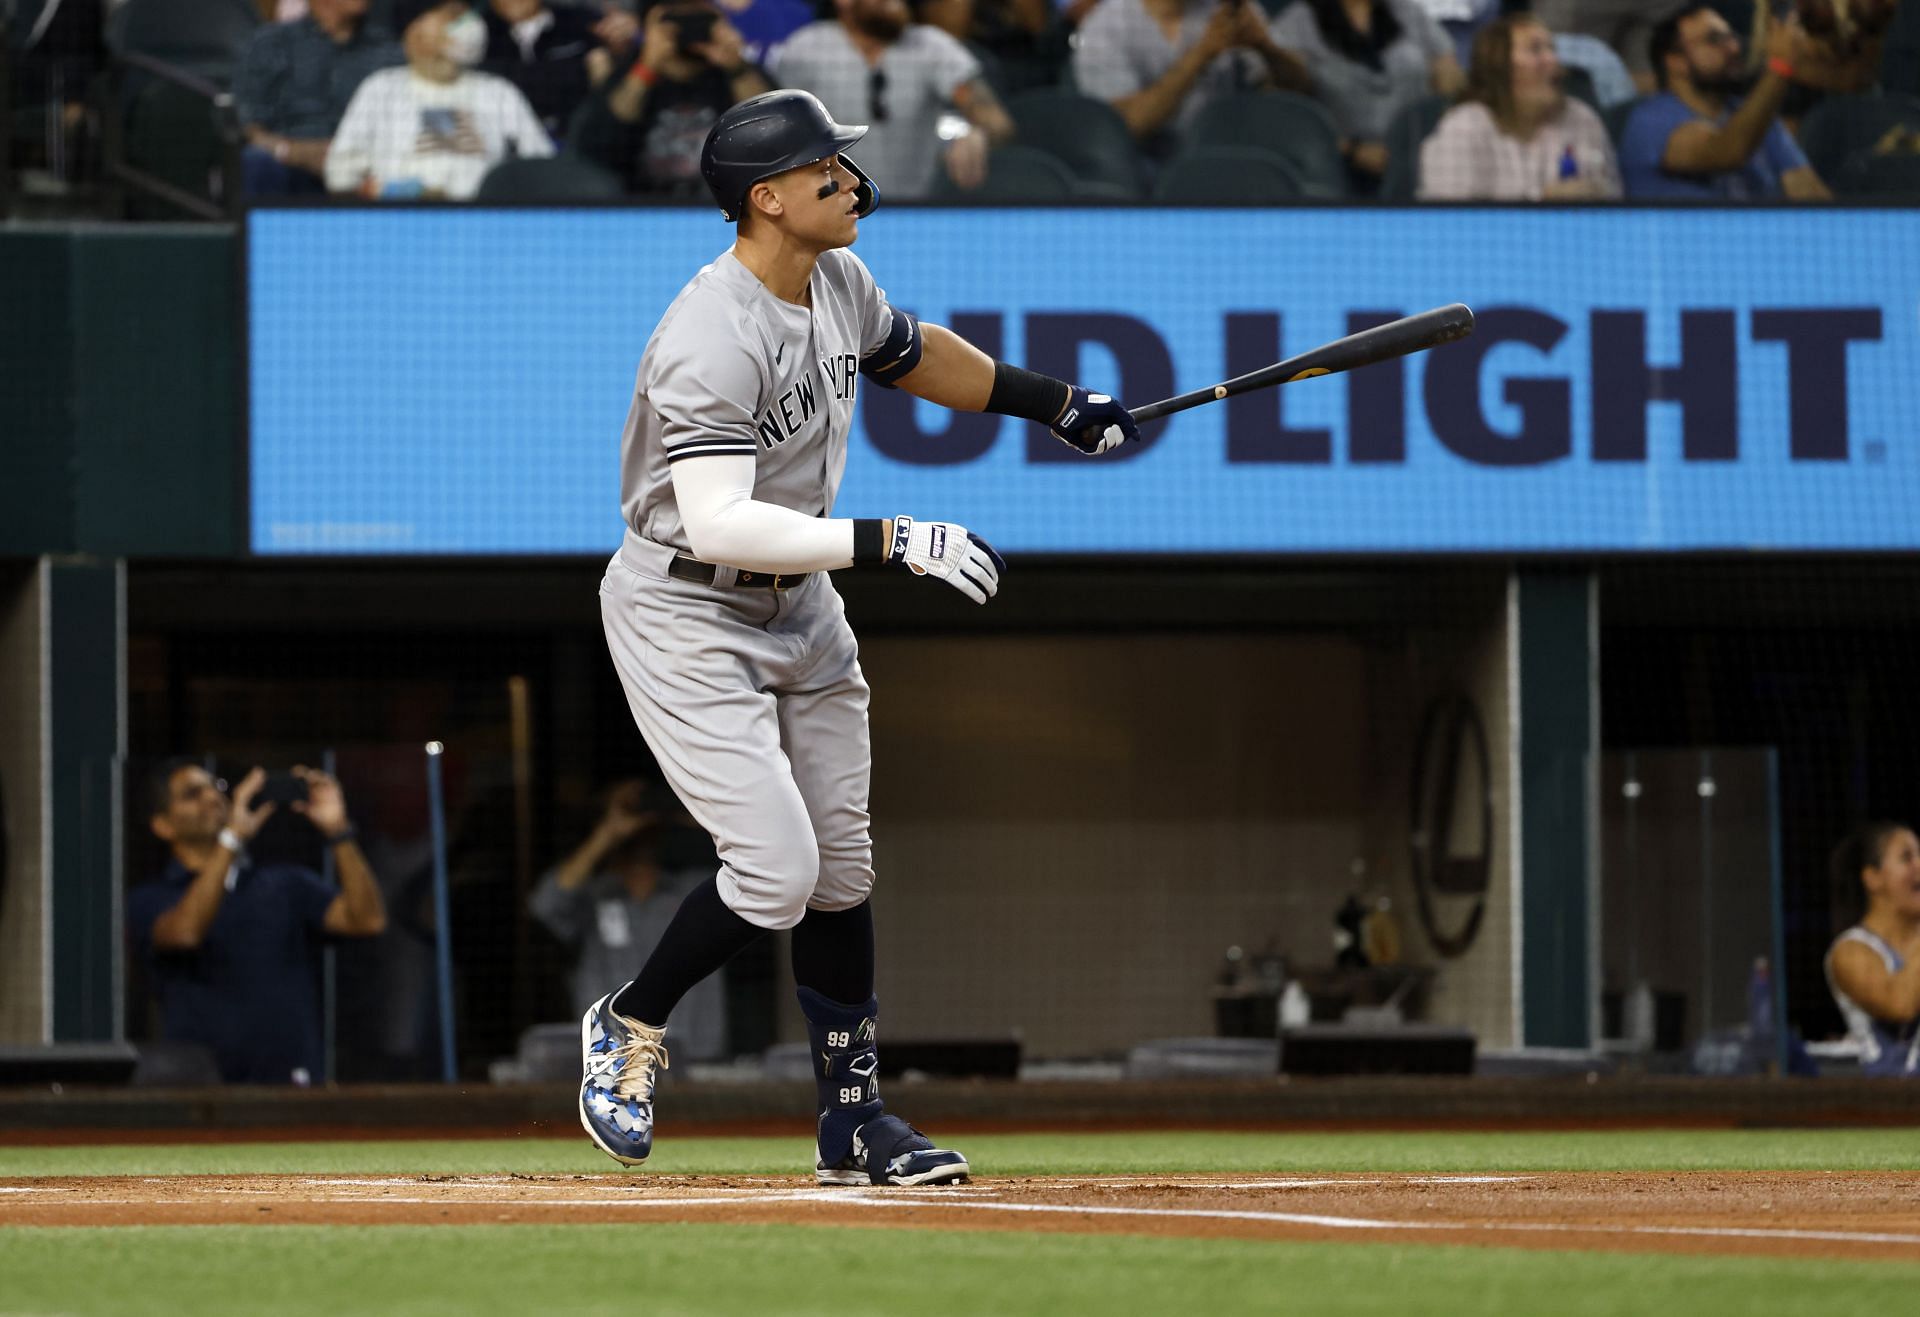 Fan who caught Aaron Judge's 62nd home run offered $2 million for